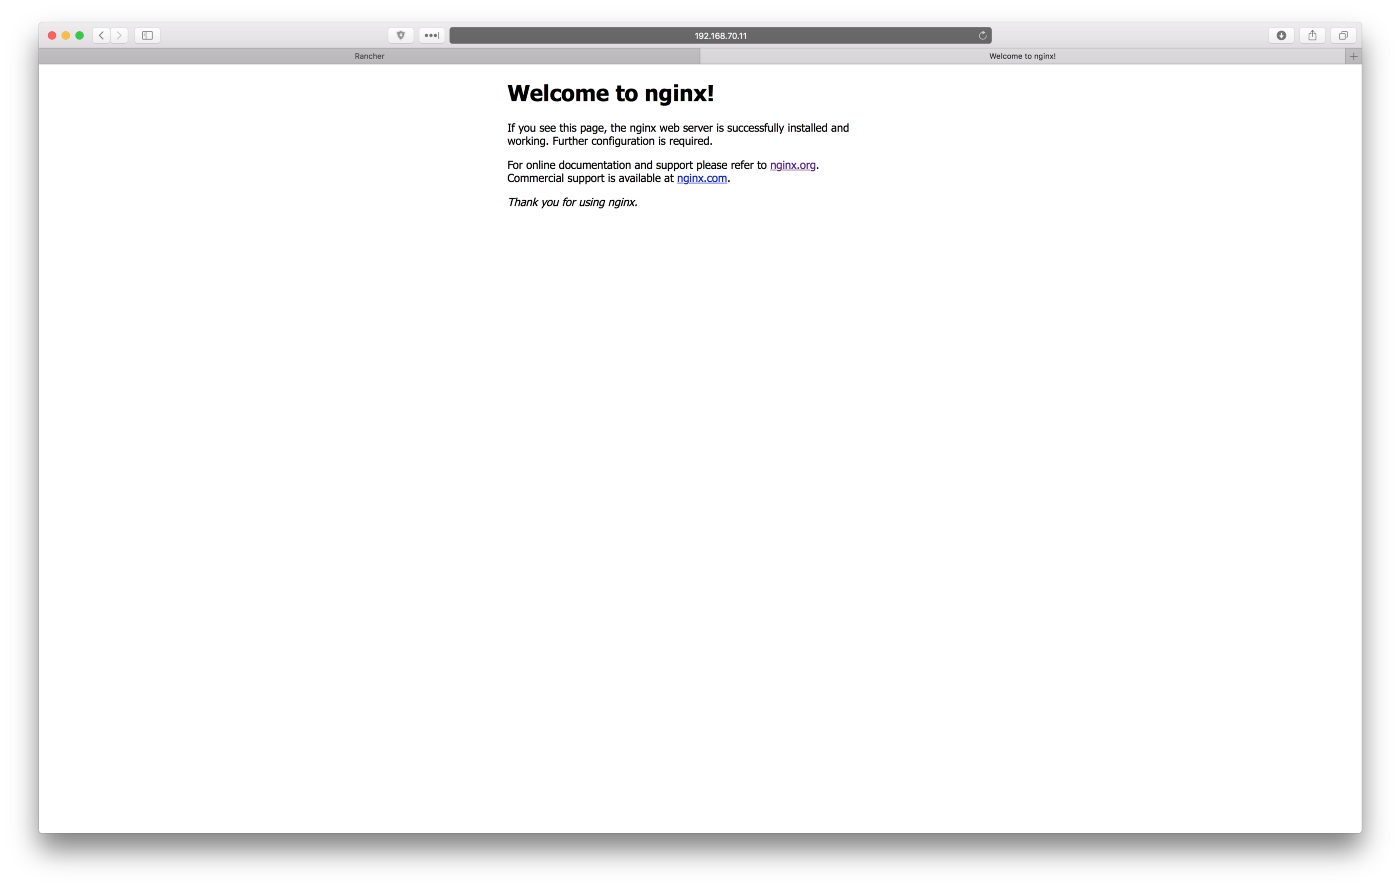 Testing deployment, Nginx welcome page